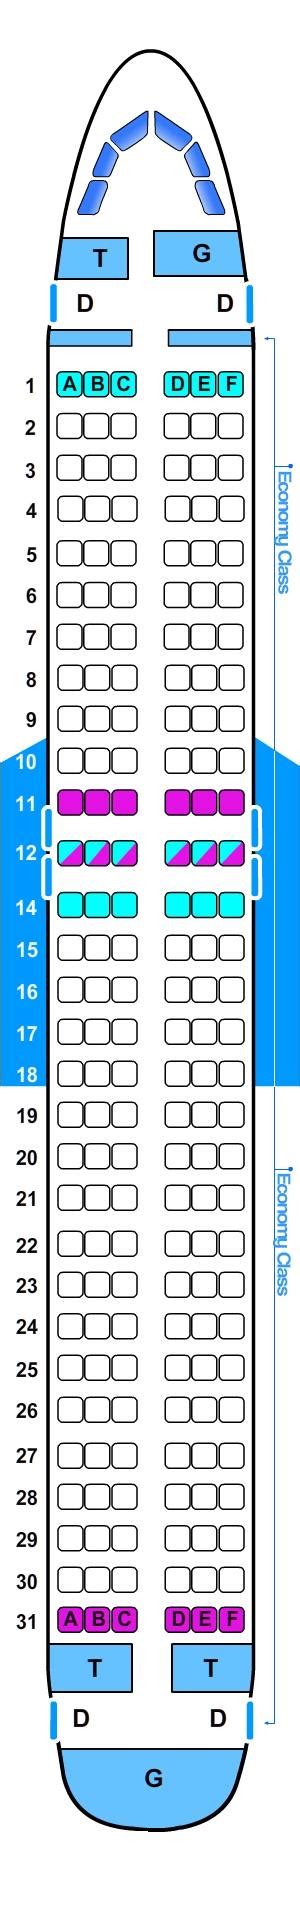 Seating Chart For Airbus A